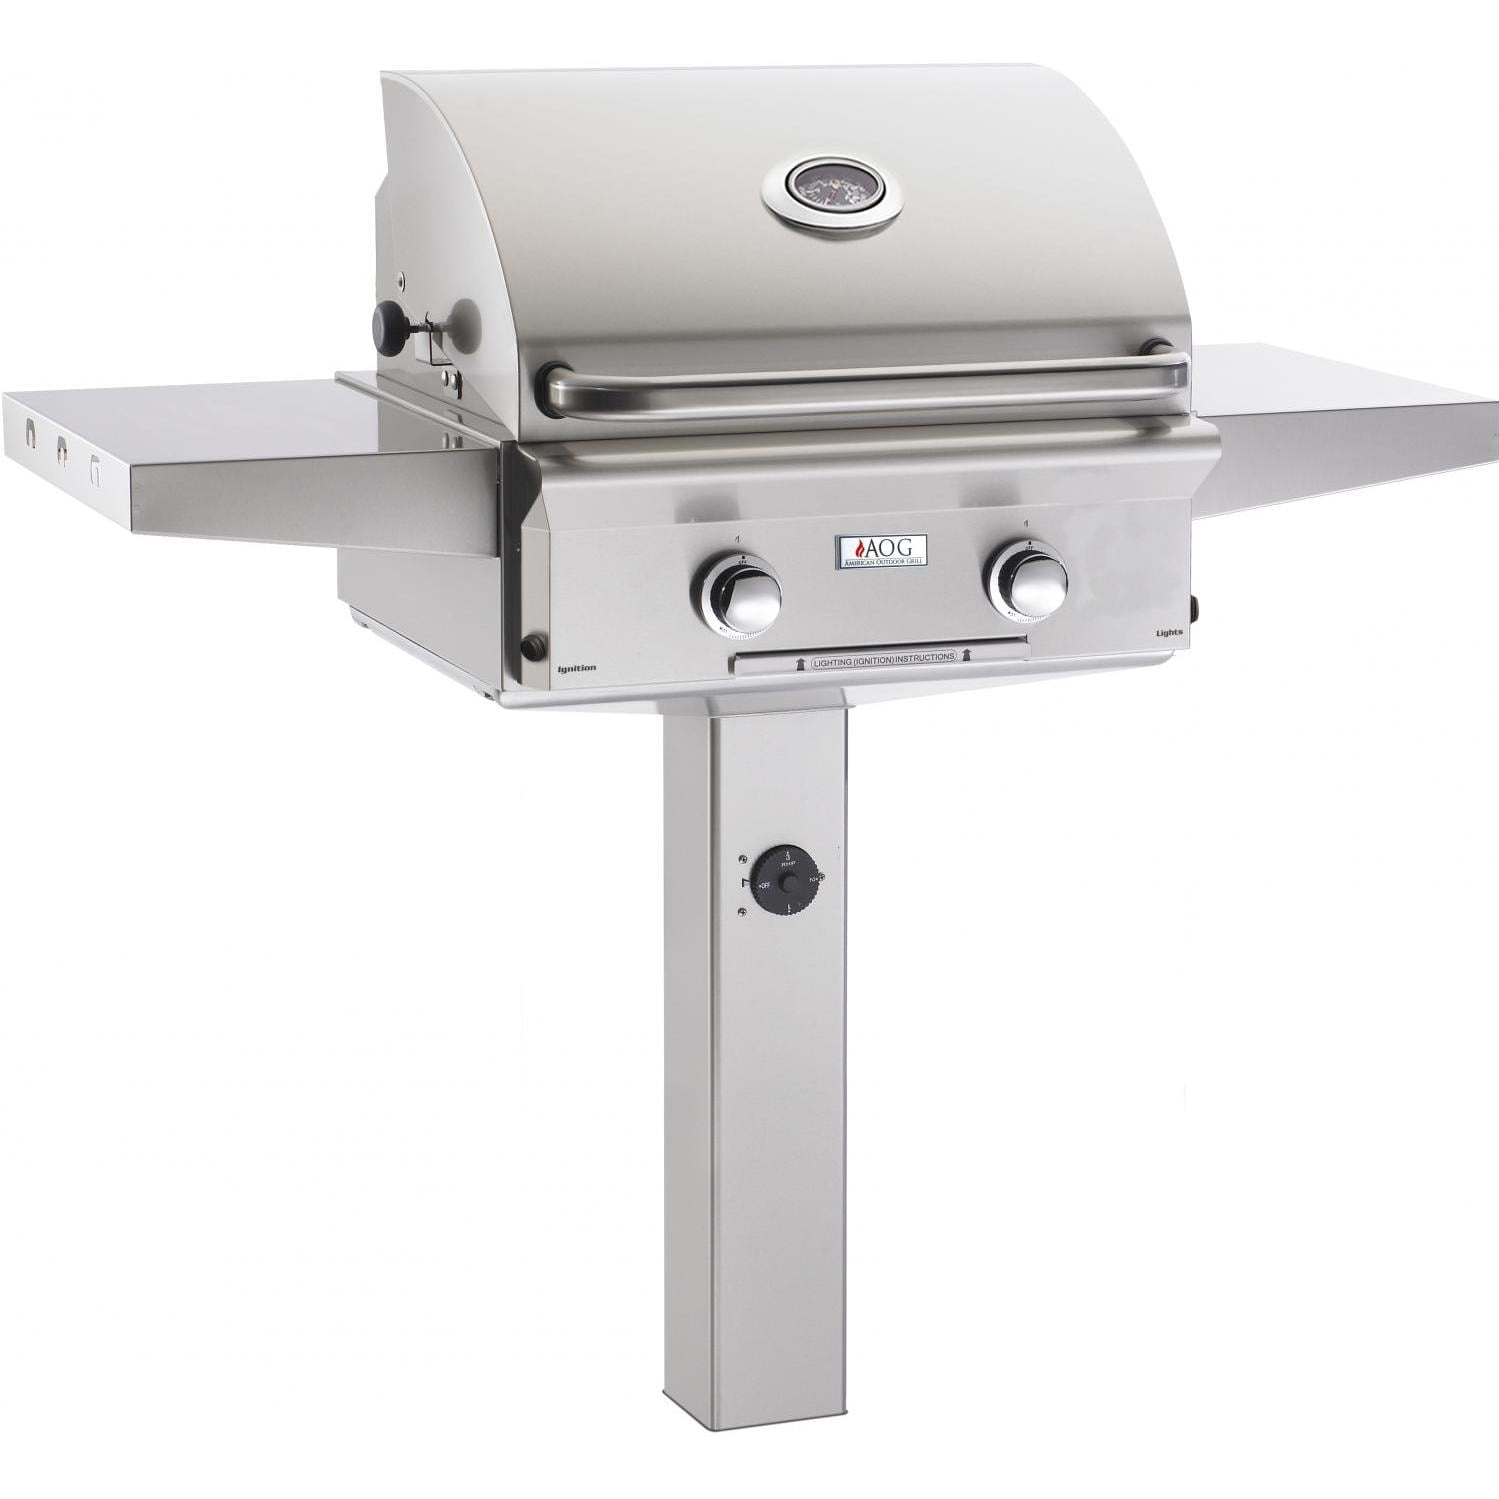 Picture of American Outdoor Grill 24NGL-00SP 24 in. 2 Burner Natural Gas Grill On in Ground Post